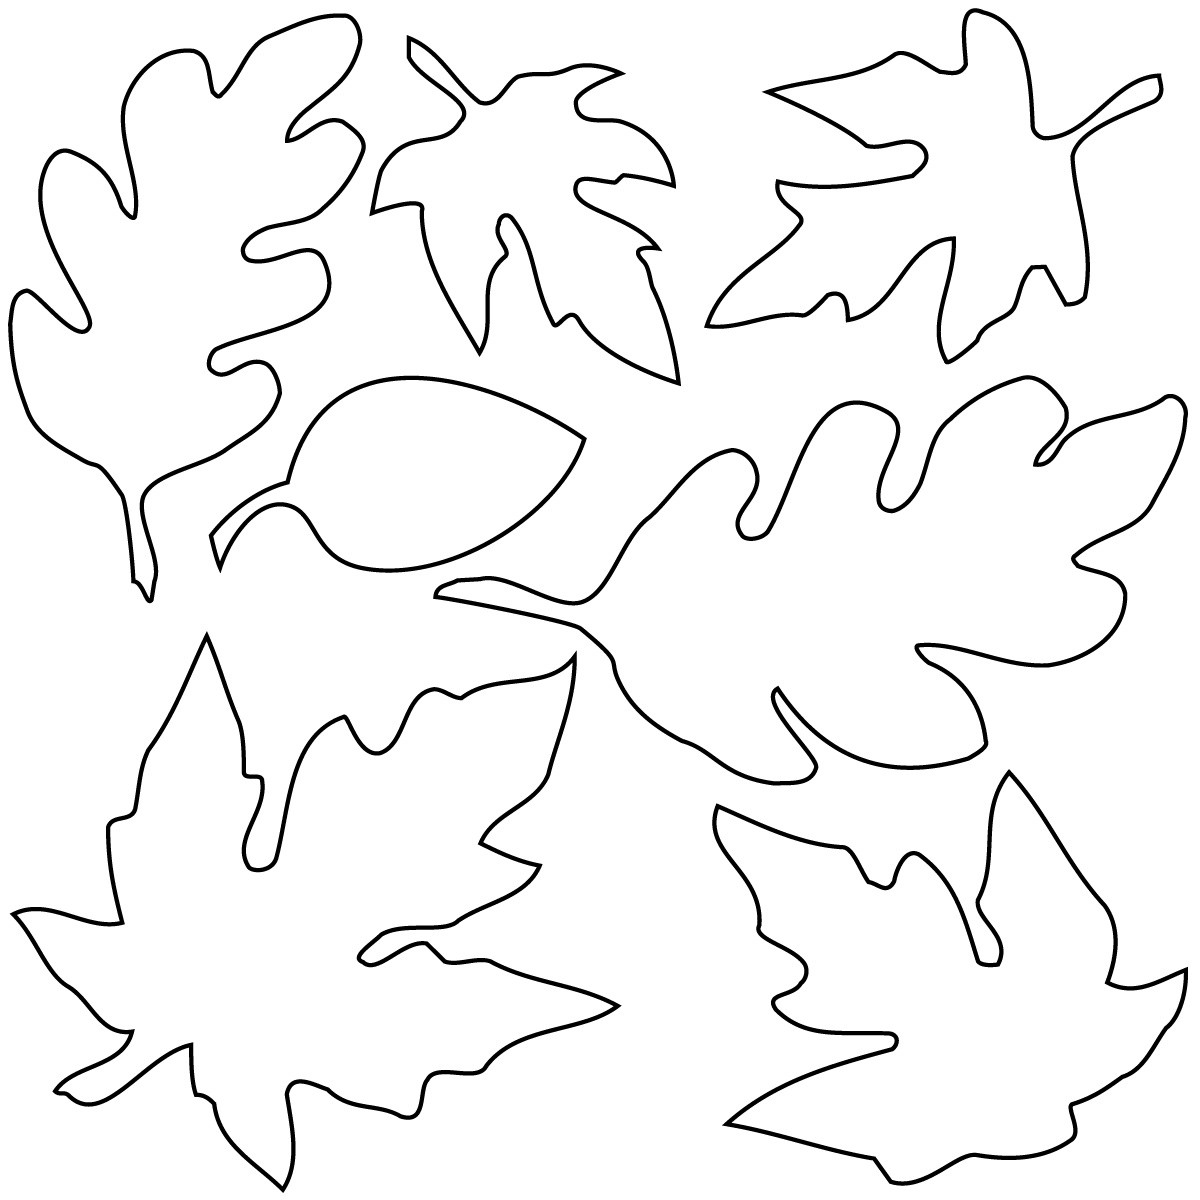 Fall  black and white leaves clipart black and white 5